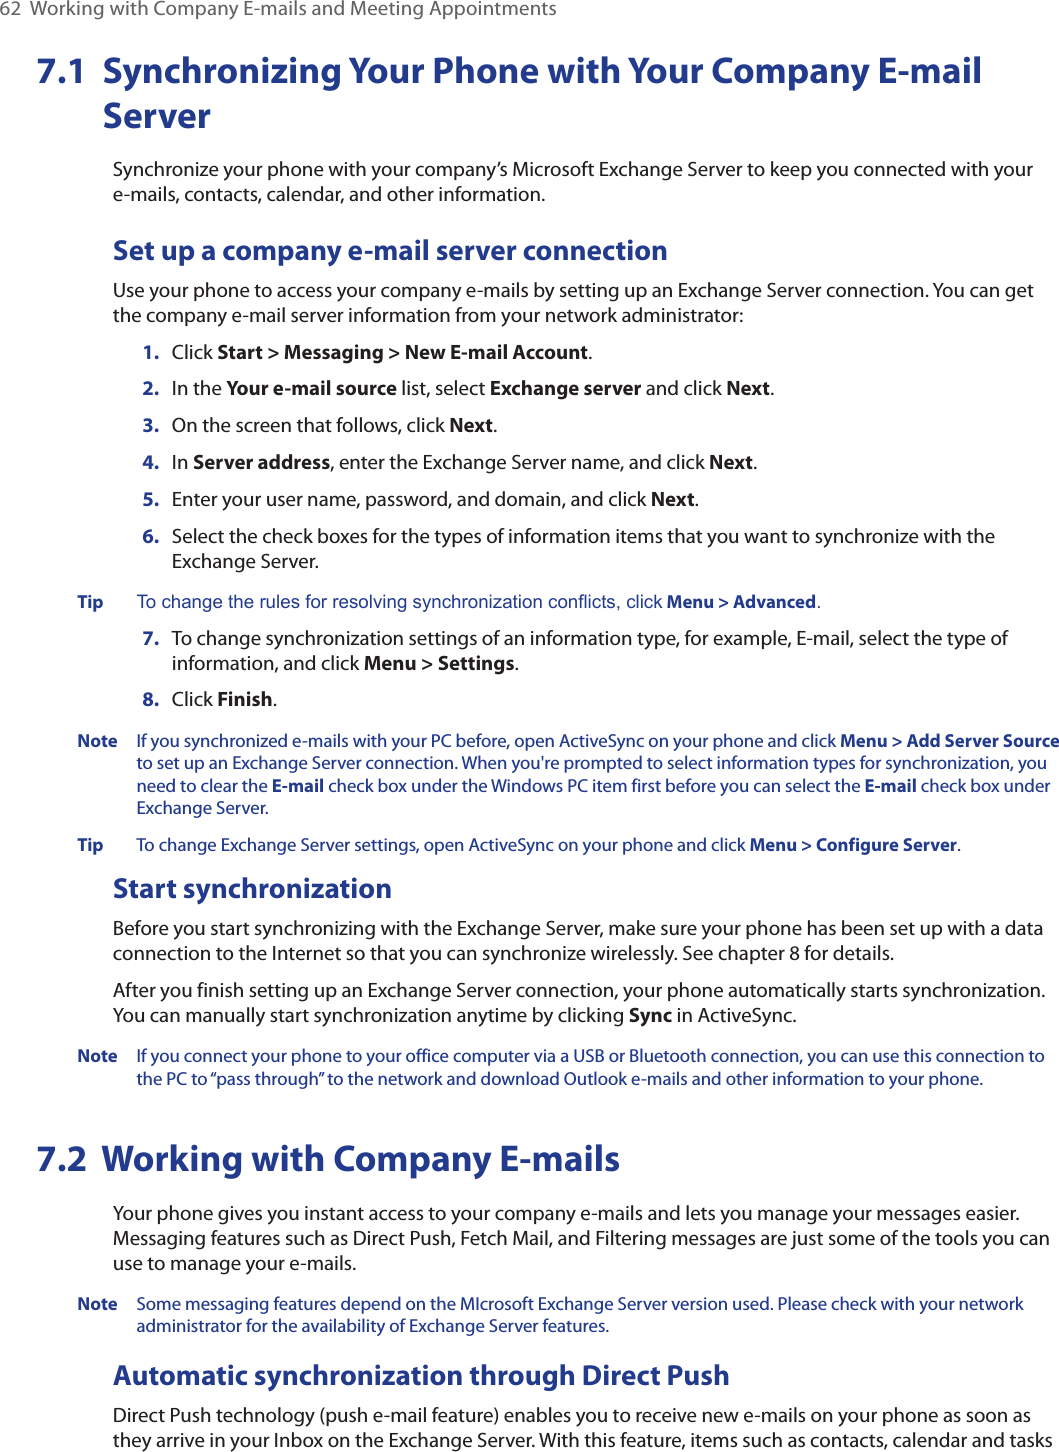 62  Working with Company E-mails and Meeting Appointments7.1   Synchronizing Your Phone with Your Company E-mail ServerSynchronize your phone with your company’s Microsoft Exchange Server to keep you connected with your e-mails, contacts, calendar, and other information.Set up a company e-mail server connectionUse your phone to access your company e-mails by setting up an Exchange Server connection. You can get the company e-mail server information from your network administrator:1.  Click Start &gt; Messaging &gt; New E-mail Account.2.  In the Your e-mail source list, select Exchange server and click Next.3.  On the screen that follows, click Next.4.  In Server address, enter the Exchange Server name, and click Next.5.  Enter your user name, password, and domain, and click Next.6.  Select the check boxes for the types of information items that you want to synchronize with the Exchange Server.Tip To change the rules for resolving synchronization conflicts, click Menu &gt; Advanced.7.  To change synchronization settings of an information type, for example, E-mail, select the type of information, and click Menu &gt; Settings.8.  Click Finish.Note  If you synchronized e-mails with your PC before, open ActiveSync on your phone and click Menu &gt; Add Server Source to set up an Exchange Server connection. When you&apos;re prompted to select information types for synchronization, you need to clear the E-mail check box under the Windows PC item first before you can select the E-mail check box under Exchange Server.Tip  To change Exchange Server settings, open ActiveSync on your phone and click Menu &gt; Configure Server.Start synchronizationBefore you start synchronizing with the Exchange Server, make sure your phone has been set up with a data connection to the Internet so that you can synchronize wirelessly. See chapter 8 for details.After you finish setting up an Exchange Server connection, your phone automatically starts synchronization. You can manually start synchronization anytime by clicking Sync in ActiveSync.Note  If you connect your phone to your office computer via a USB or Bluetooth connection, you can use this connection to the PC to “pass through” to the network and download Outlook e-mails and other information to your phone.7.2  Working with Company E-mailsYour phone gives you instant access to your company e-mails and lets you manage your messages easier. Messaging features such as Direct Push, Fetch Mail, and Filtering messages are just some of the tools you can use to manage your e-mails.Note  Some messaging features depend on the MIcrosoft Exchange Server version used. Please check with your network administrator for the availability of Exchange Server features.Automatic synchronization through Direct PushDirect Push technology (push e-mail feature) enables you to receive new e-mails on your phone as soon as they arrive in your Inbox on the Exchange Server. With this feature, items such as contacts, calendar and tasks 